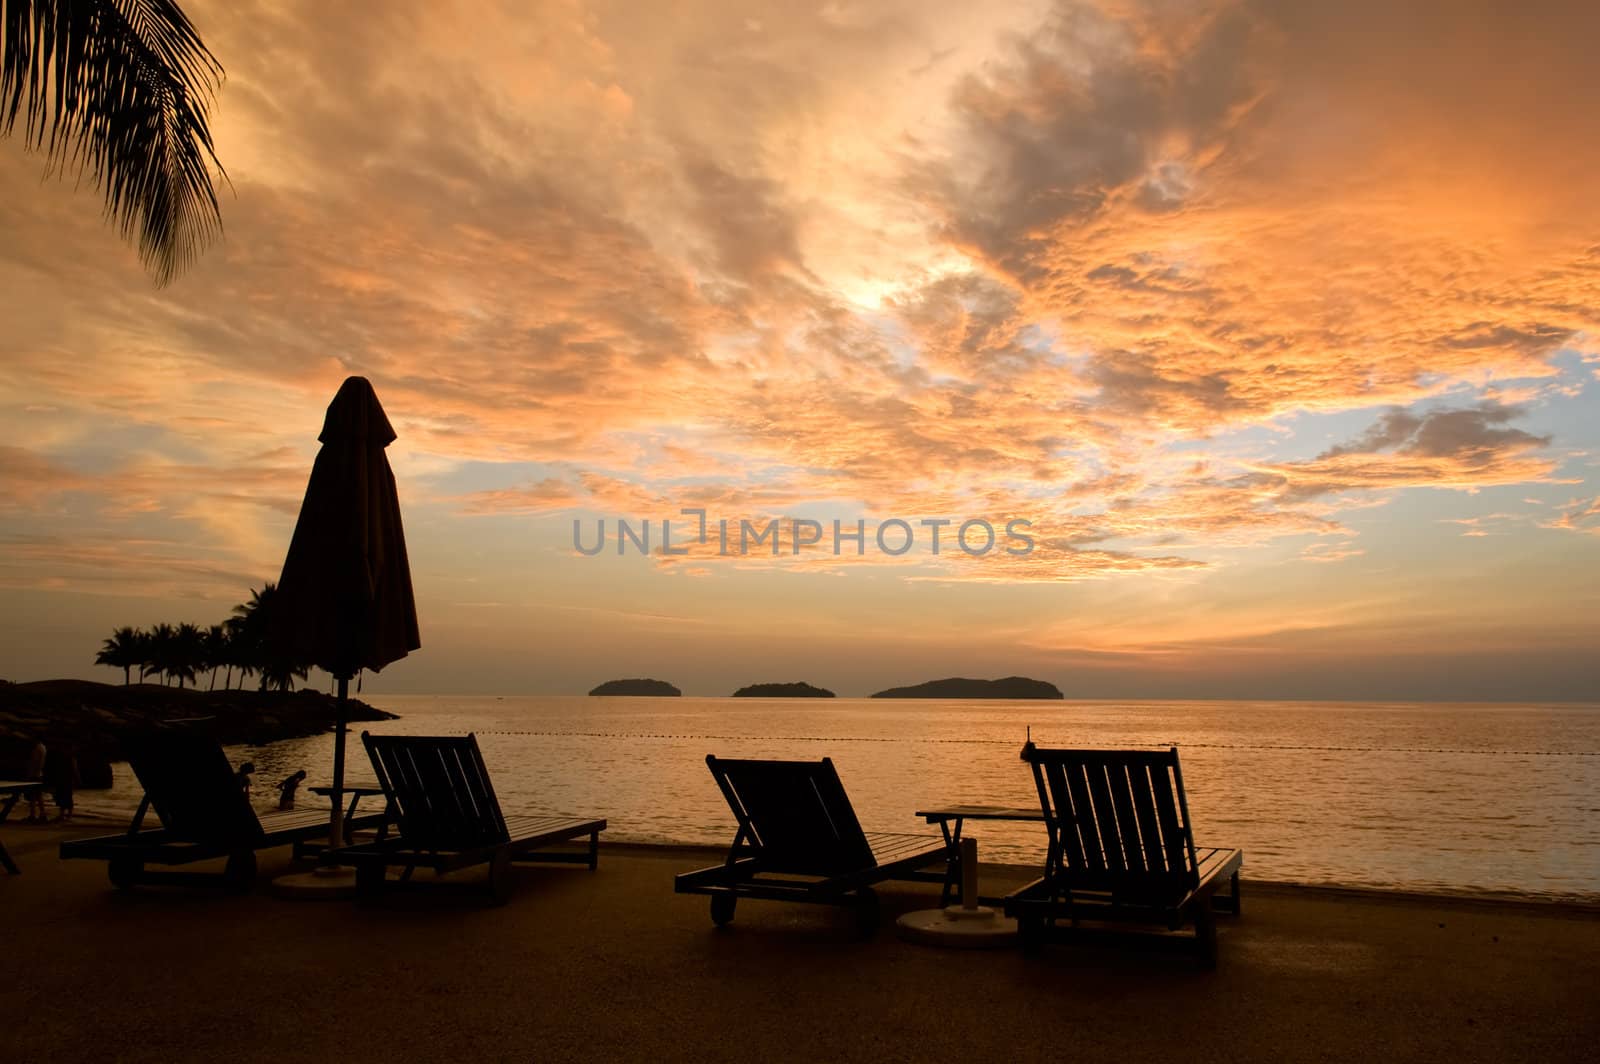 Silhouette of two relaxing seats at seashore